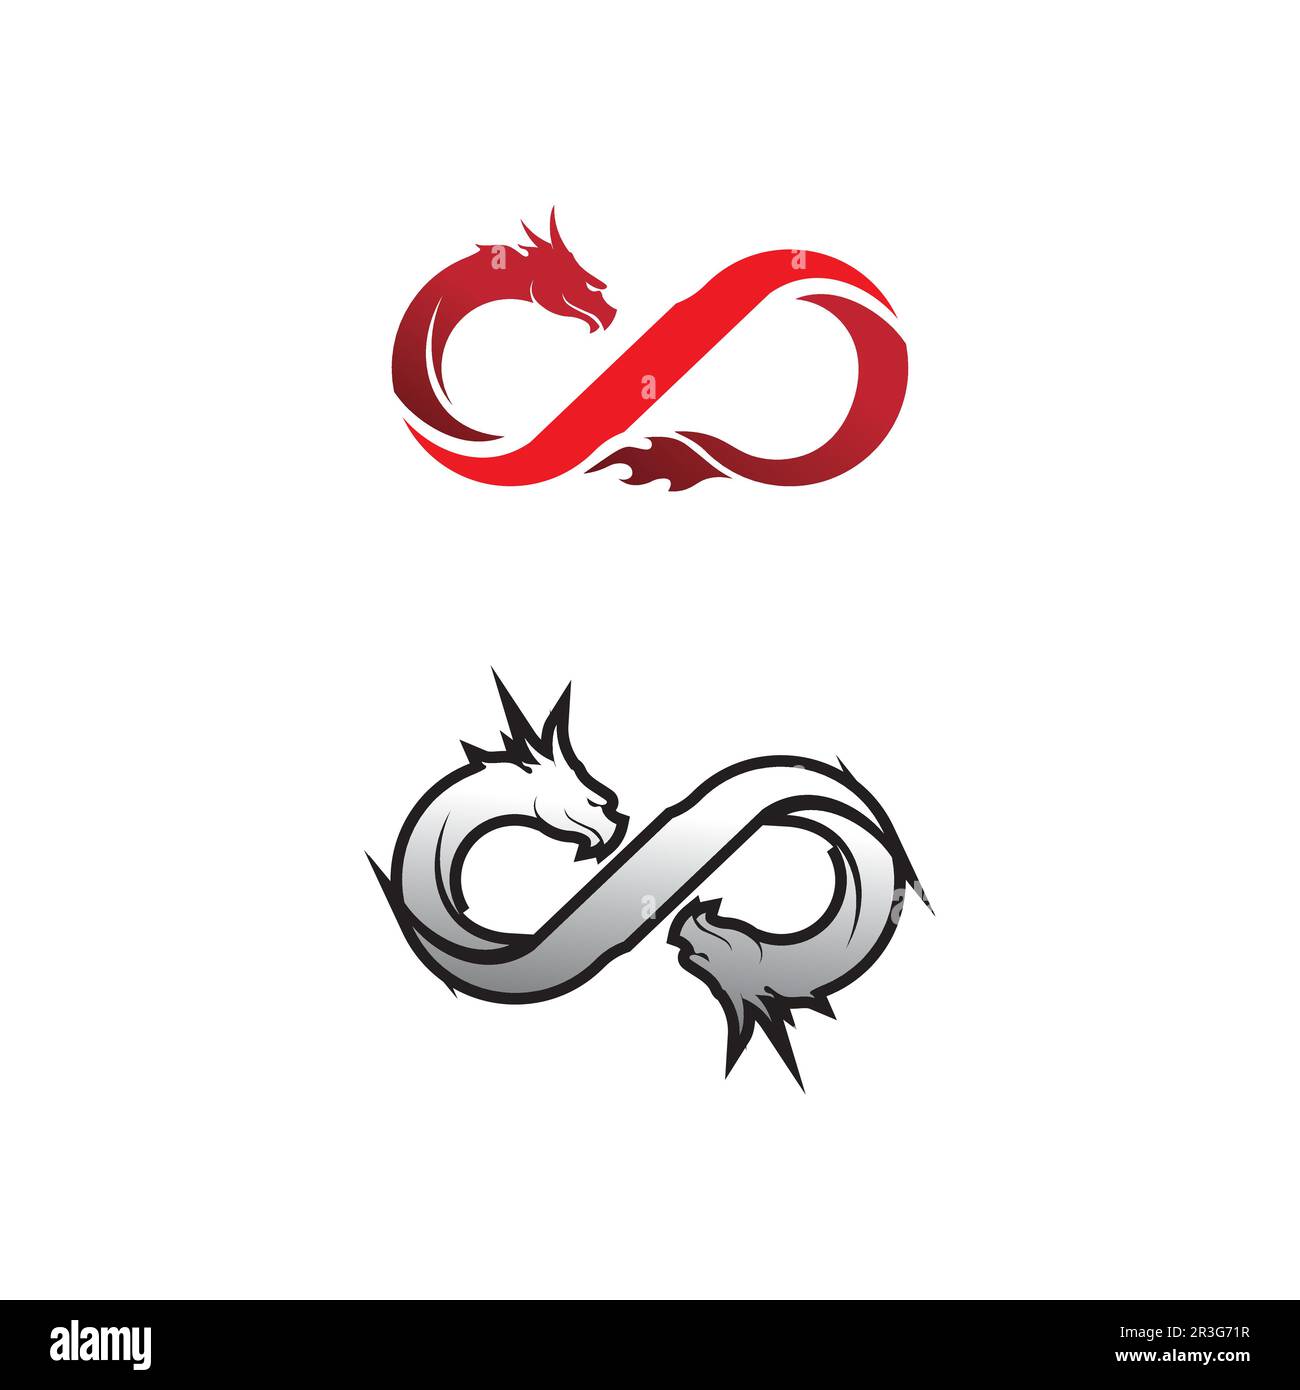 infinity design logo and 8 icon, vector, sign, creative logo for business and corporate infinity symbol Stock Vector